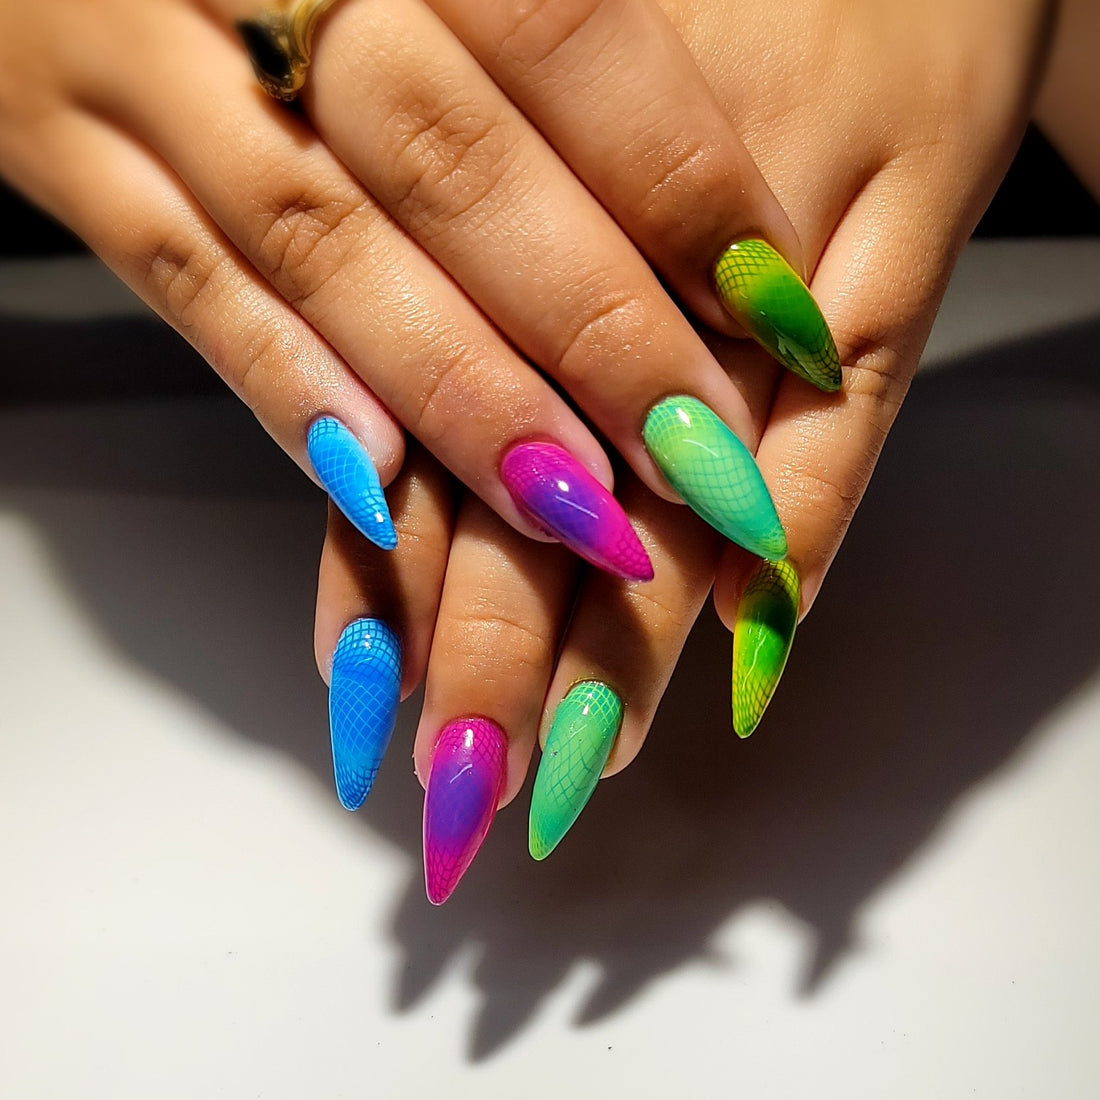 Can you airbrush gel nails?